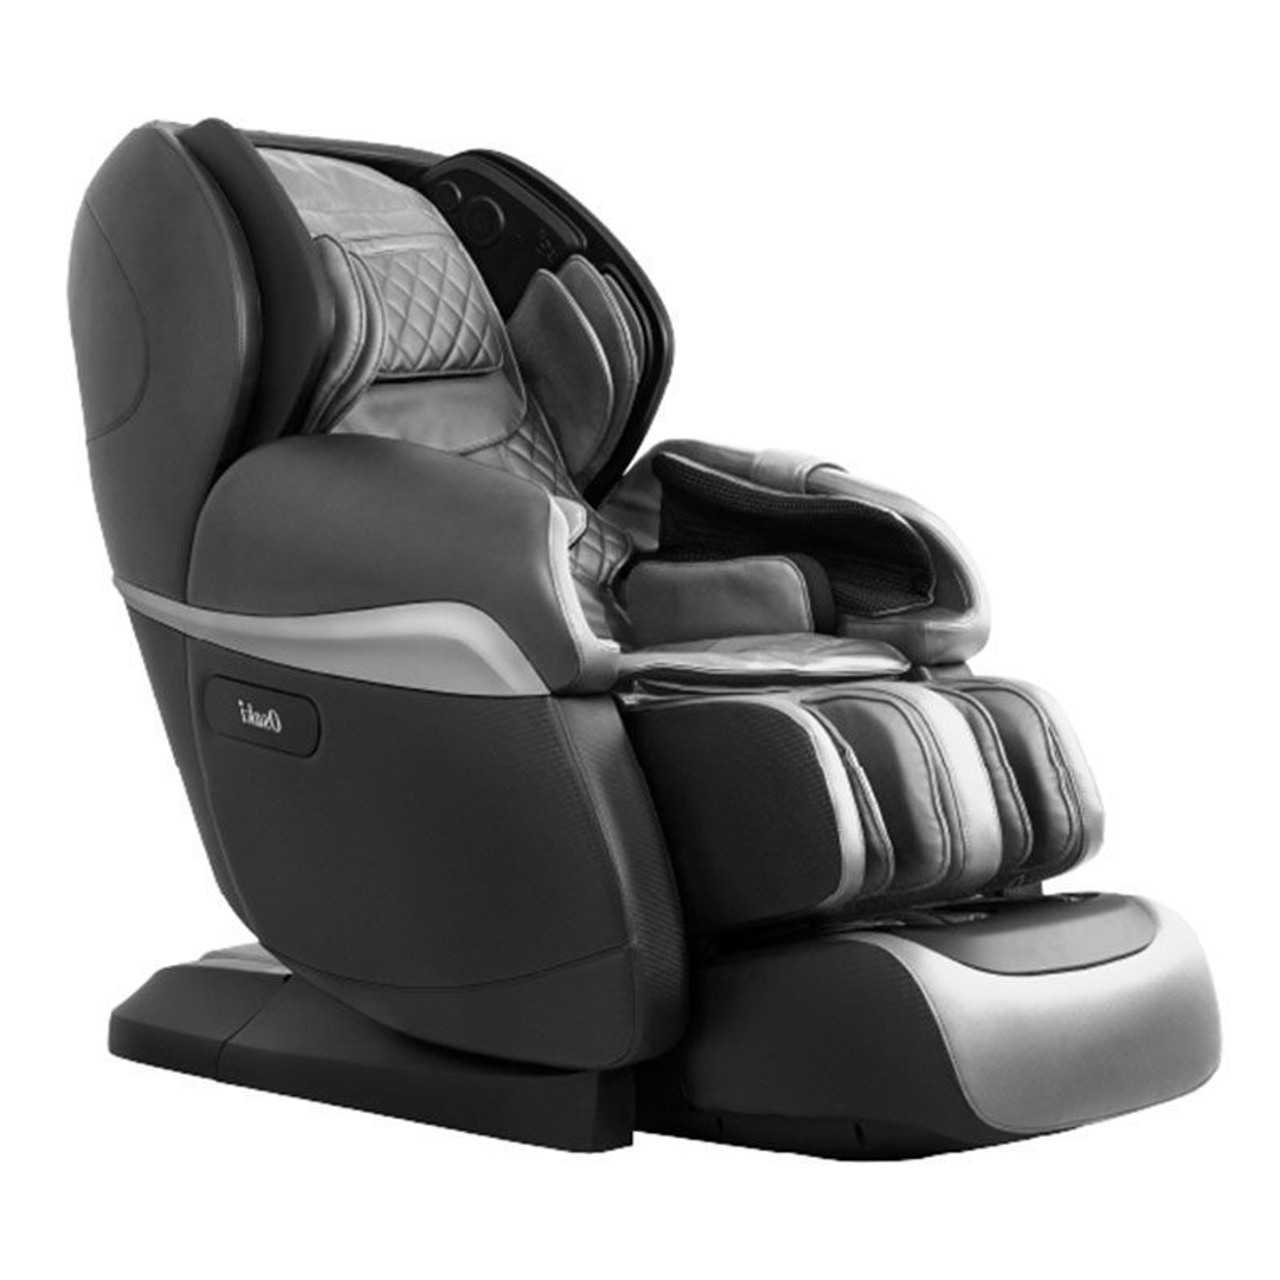 Pro OS-4D Paragon Massage Chair by Osaki